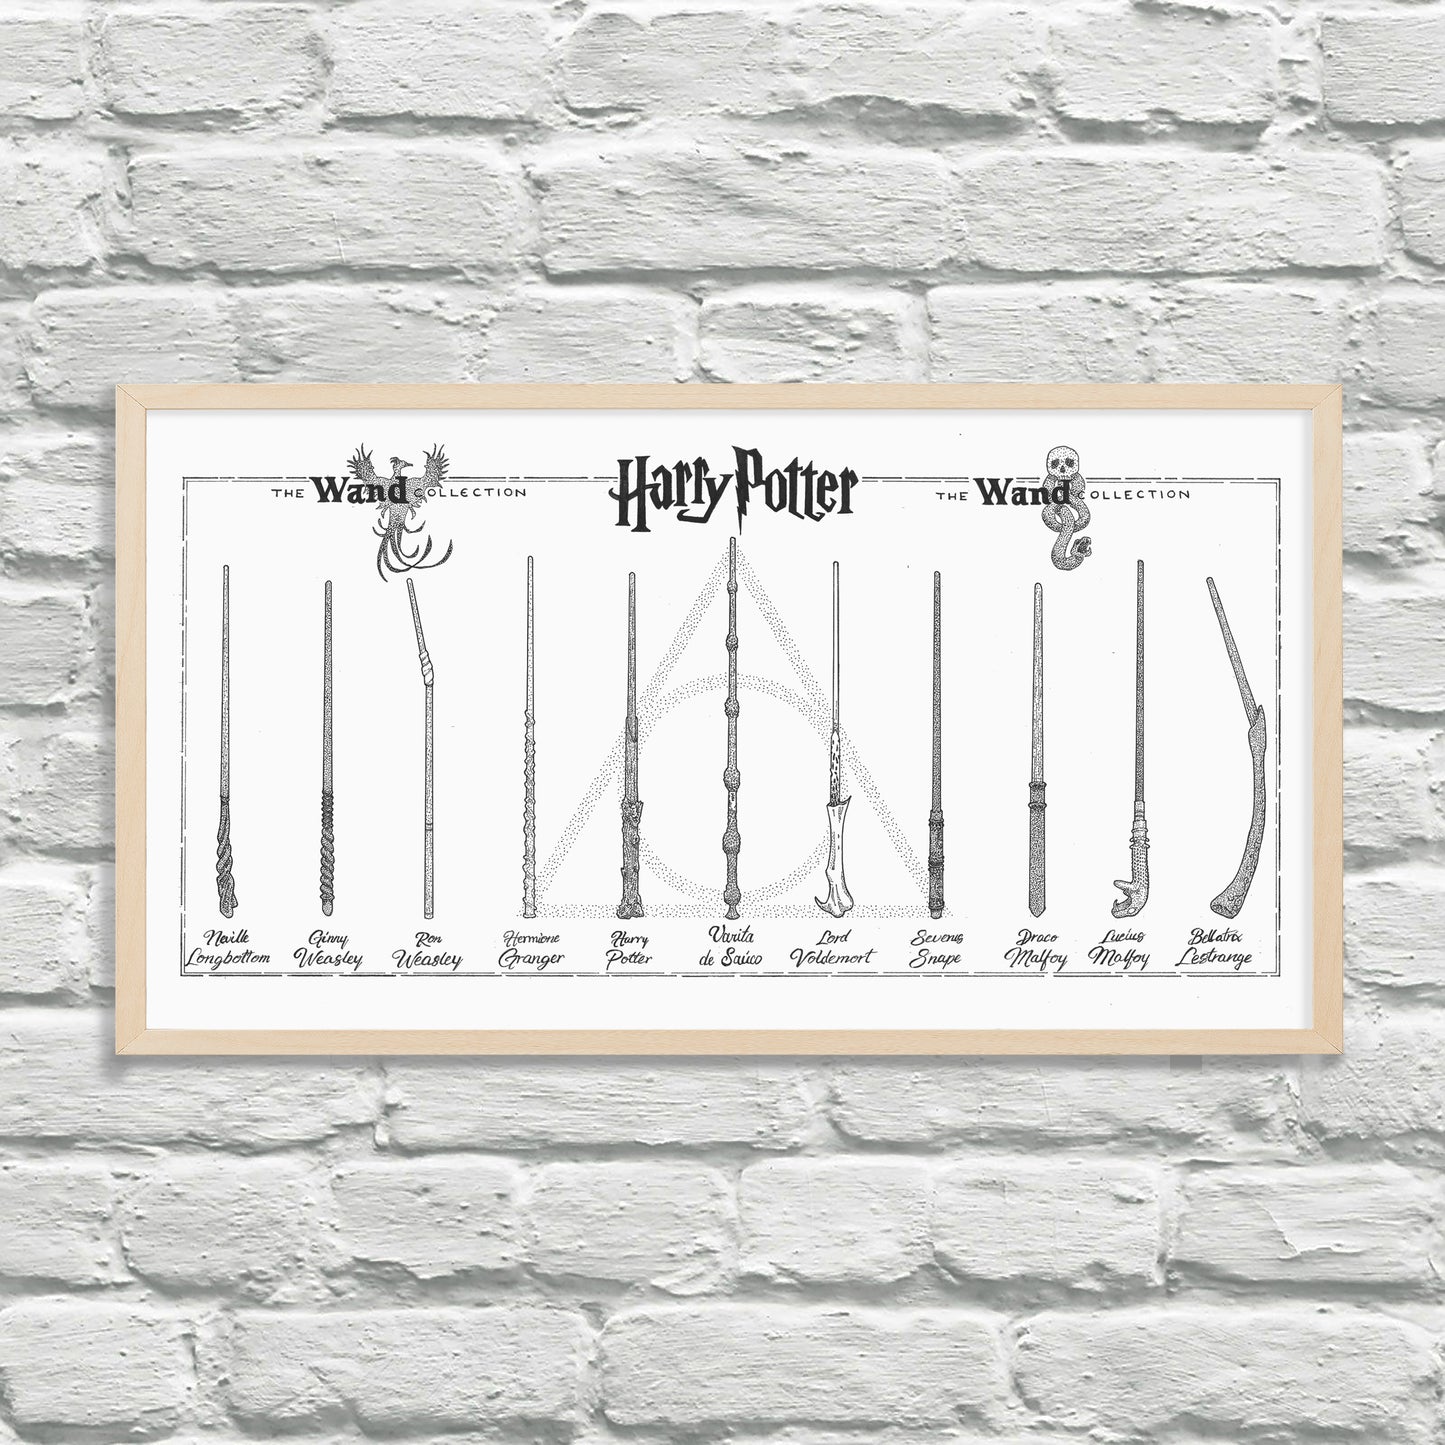 Harry Potter - The Wand Collection